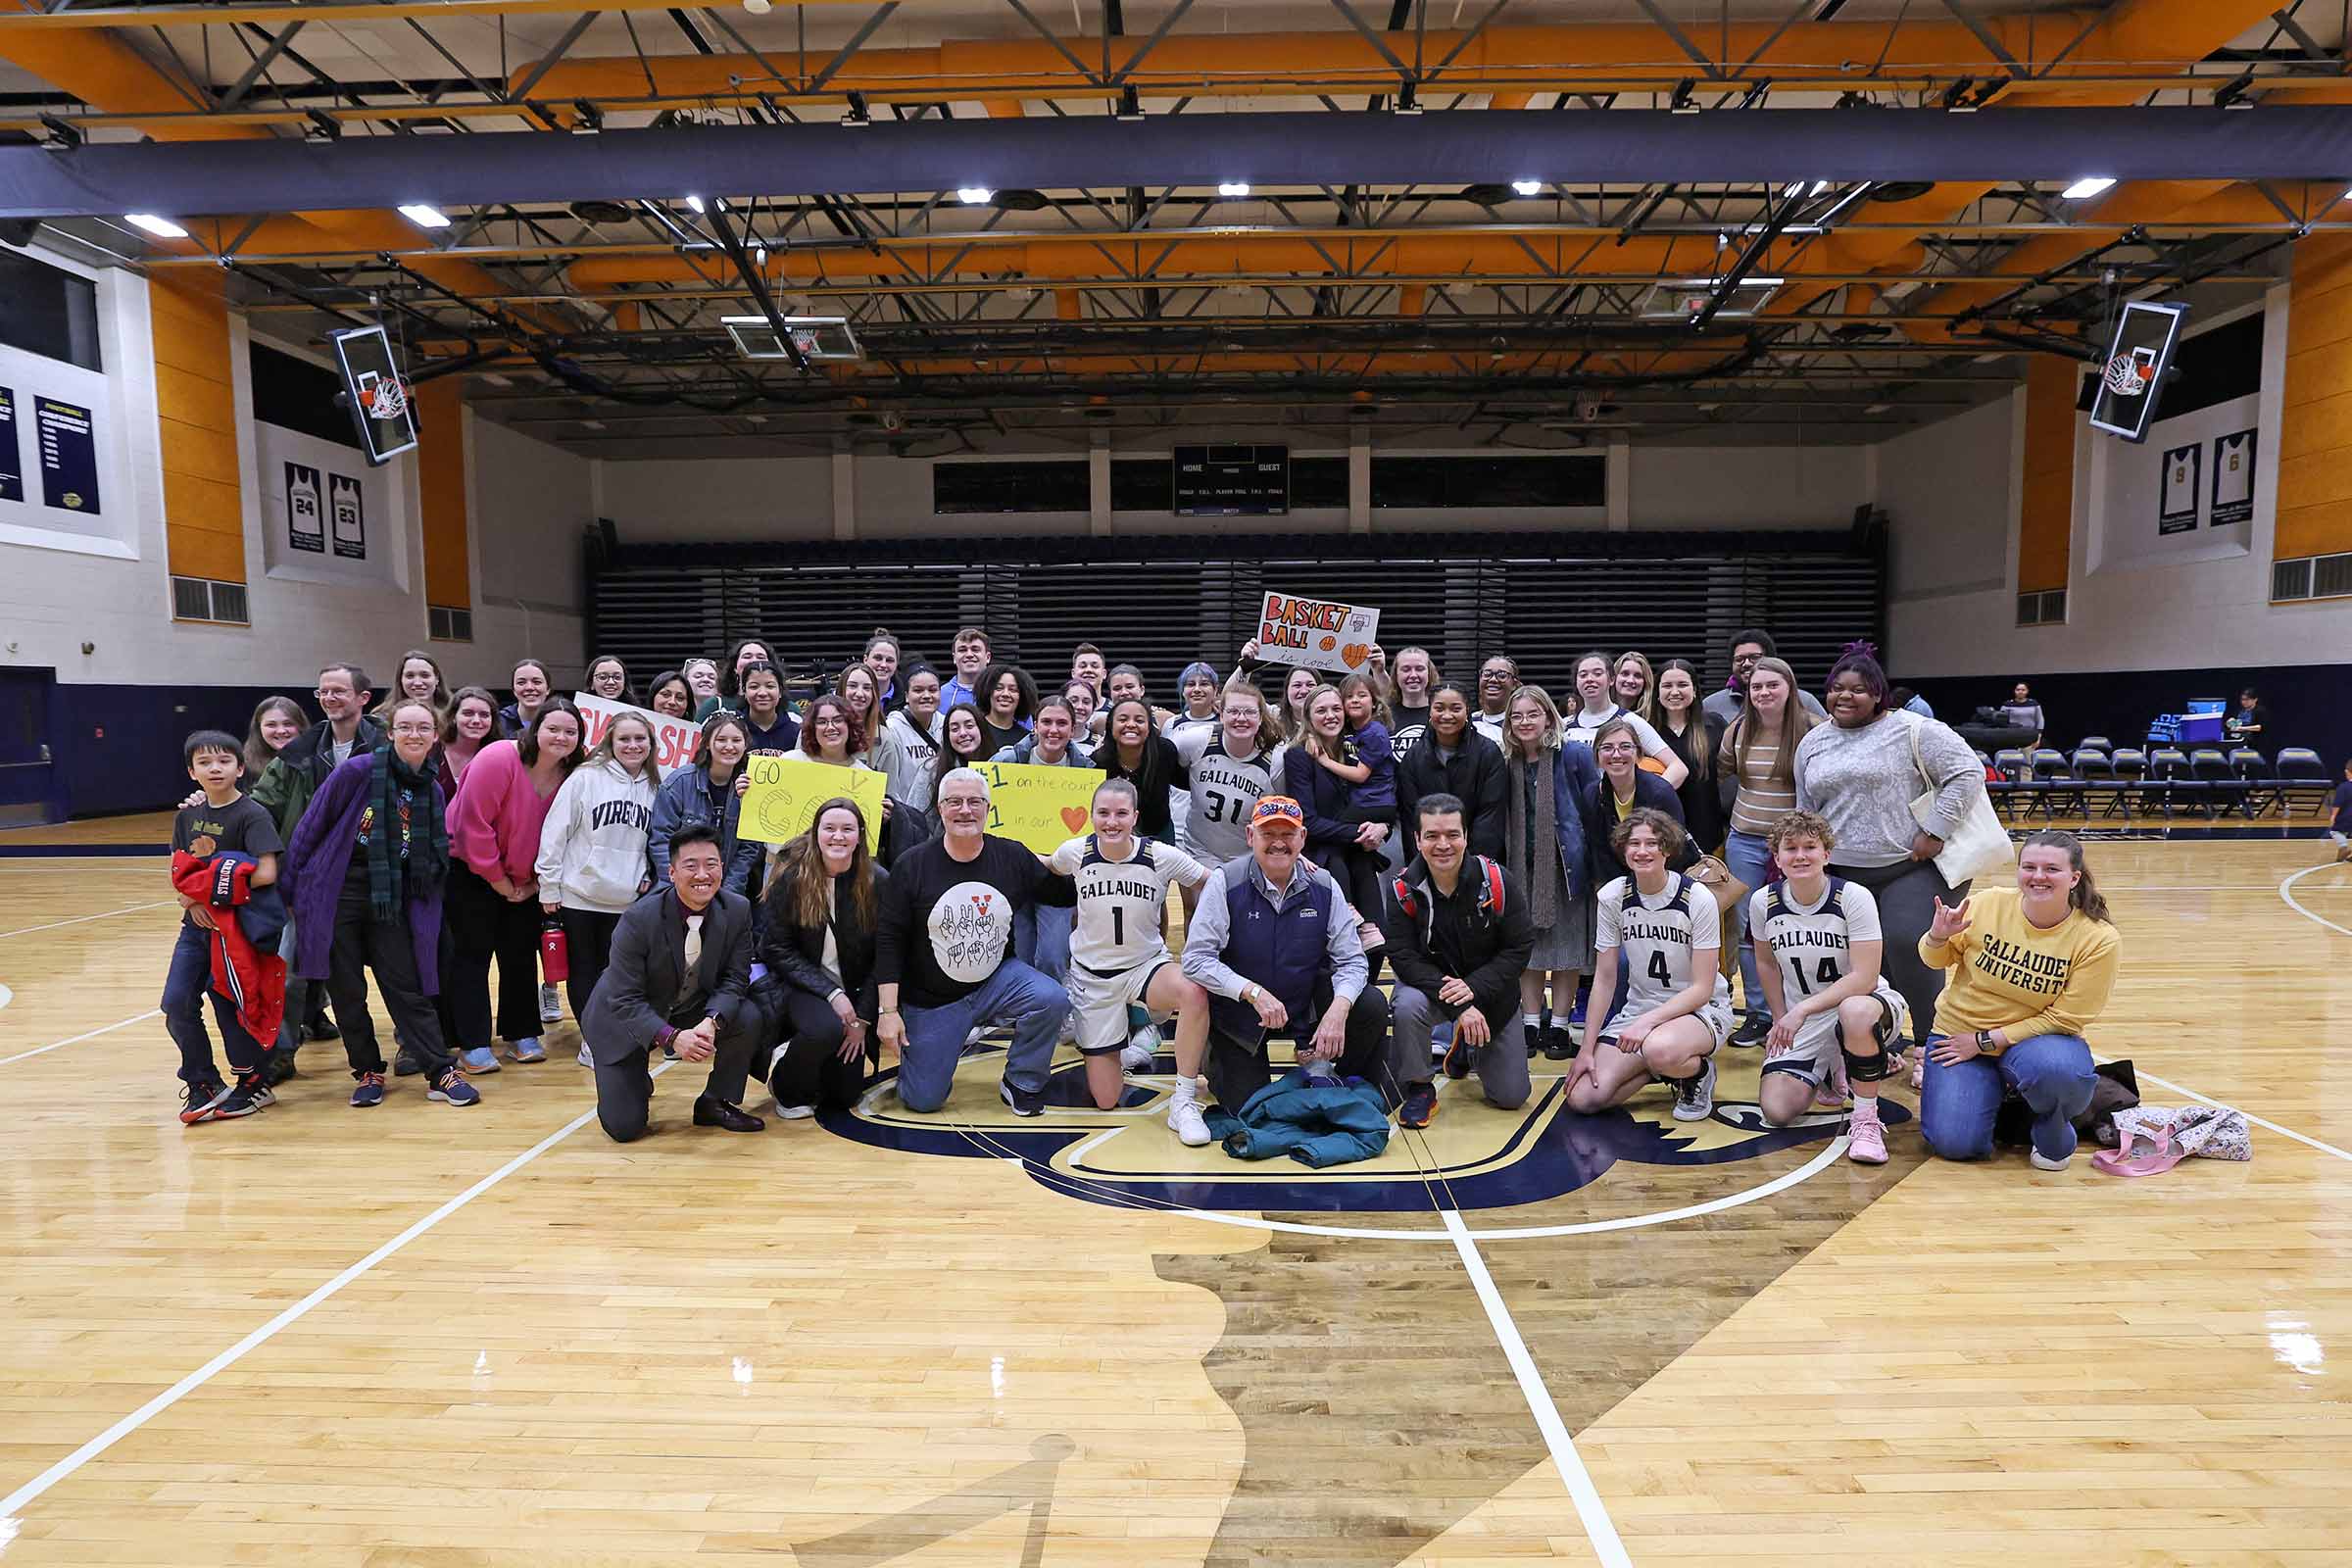 A large group of the ASL members gather for a photo on the court